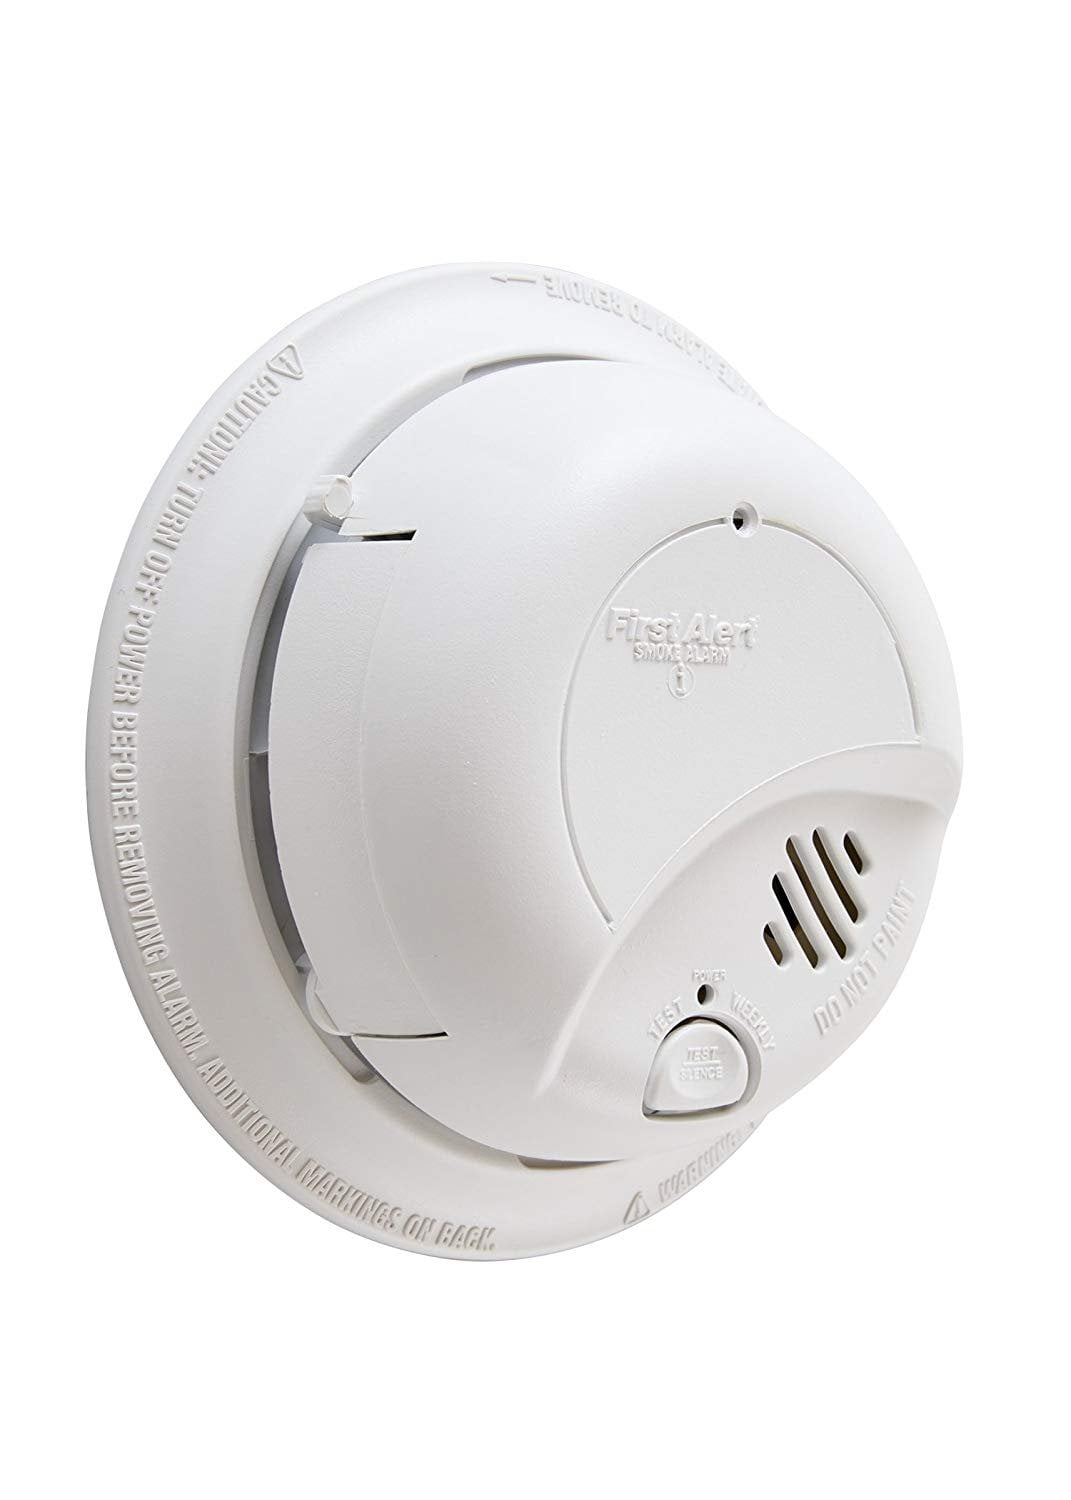 Details about   FIRST ALERT BRK 9120B-3 Hardwired Smoke Alarm with Backup Battery 3 Pack White 